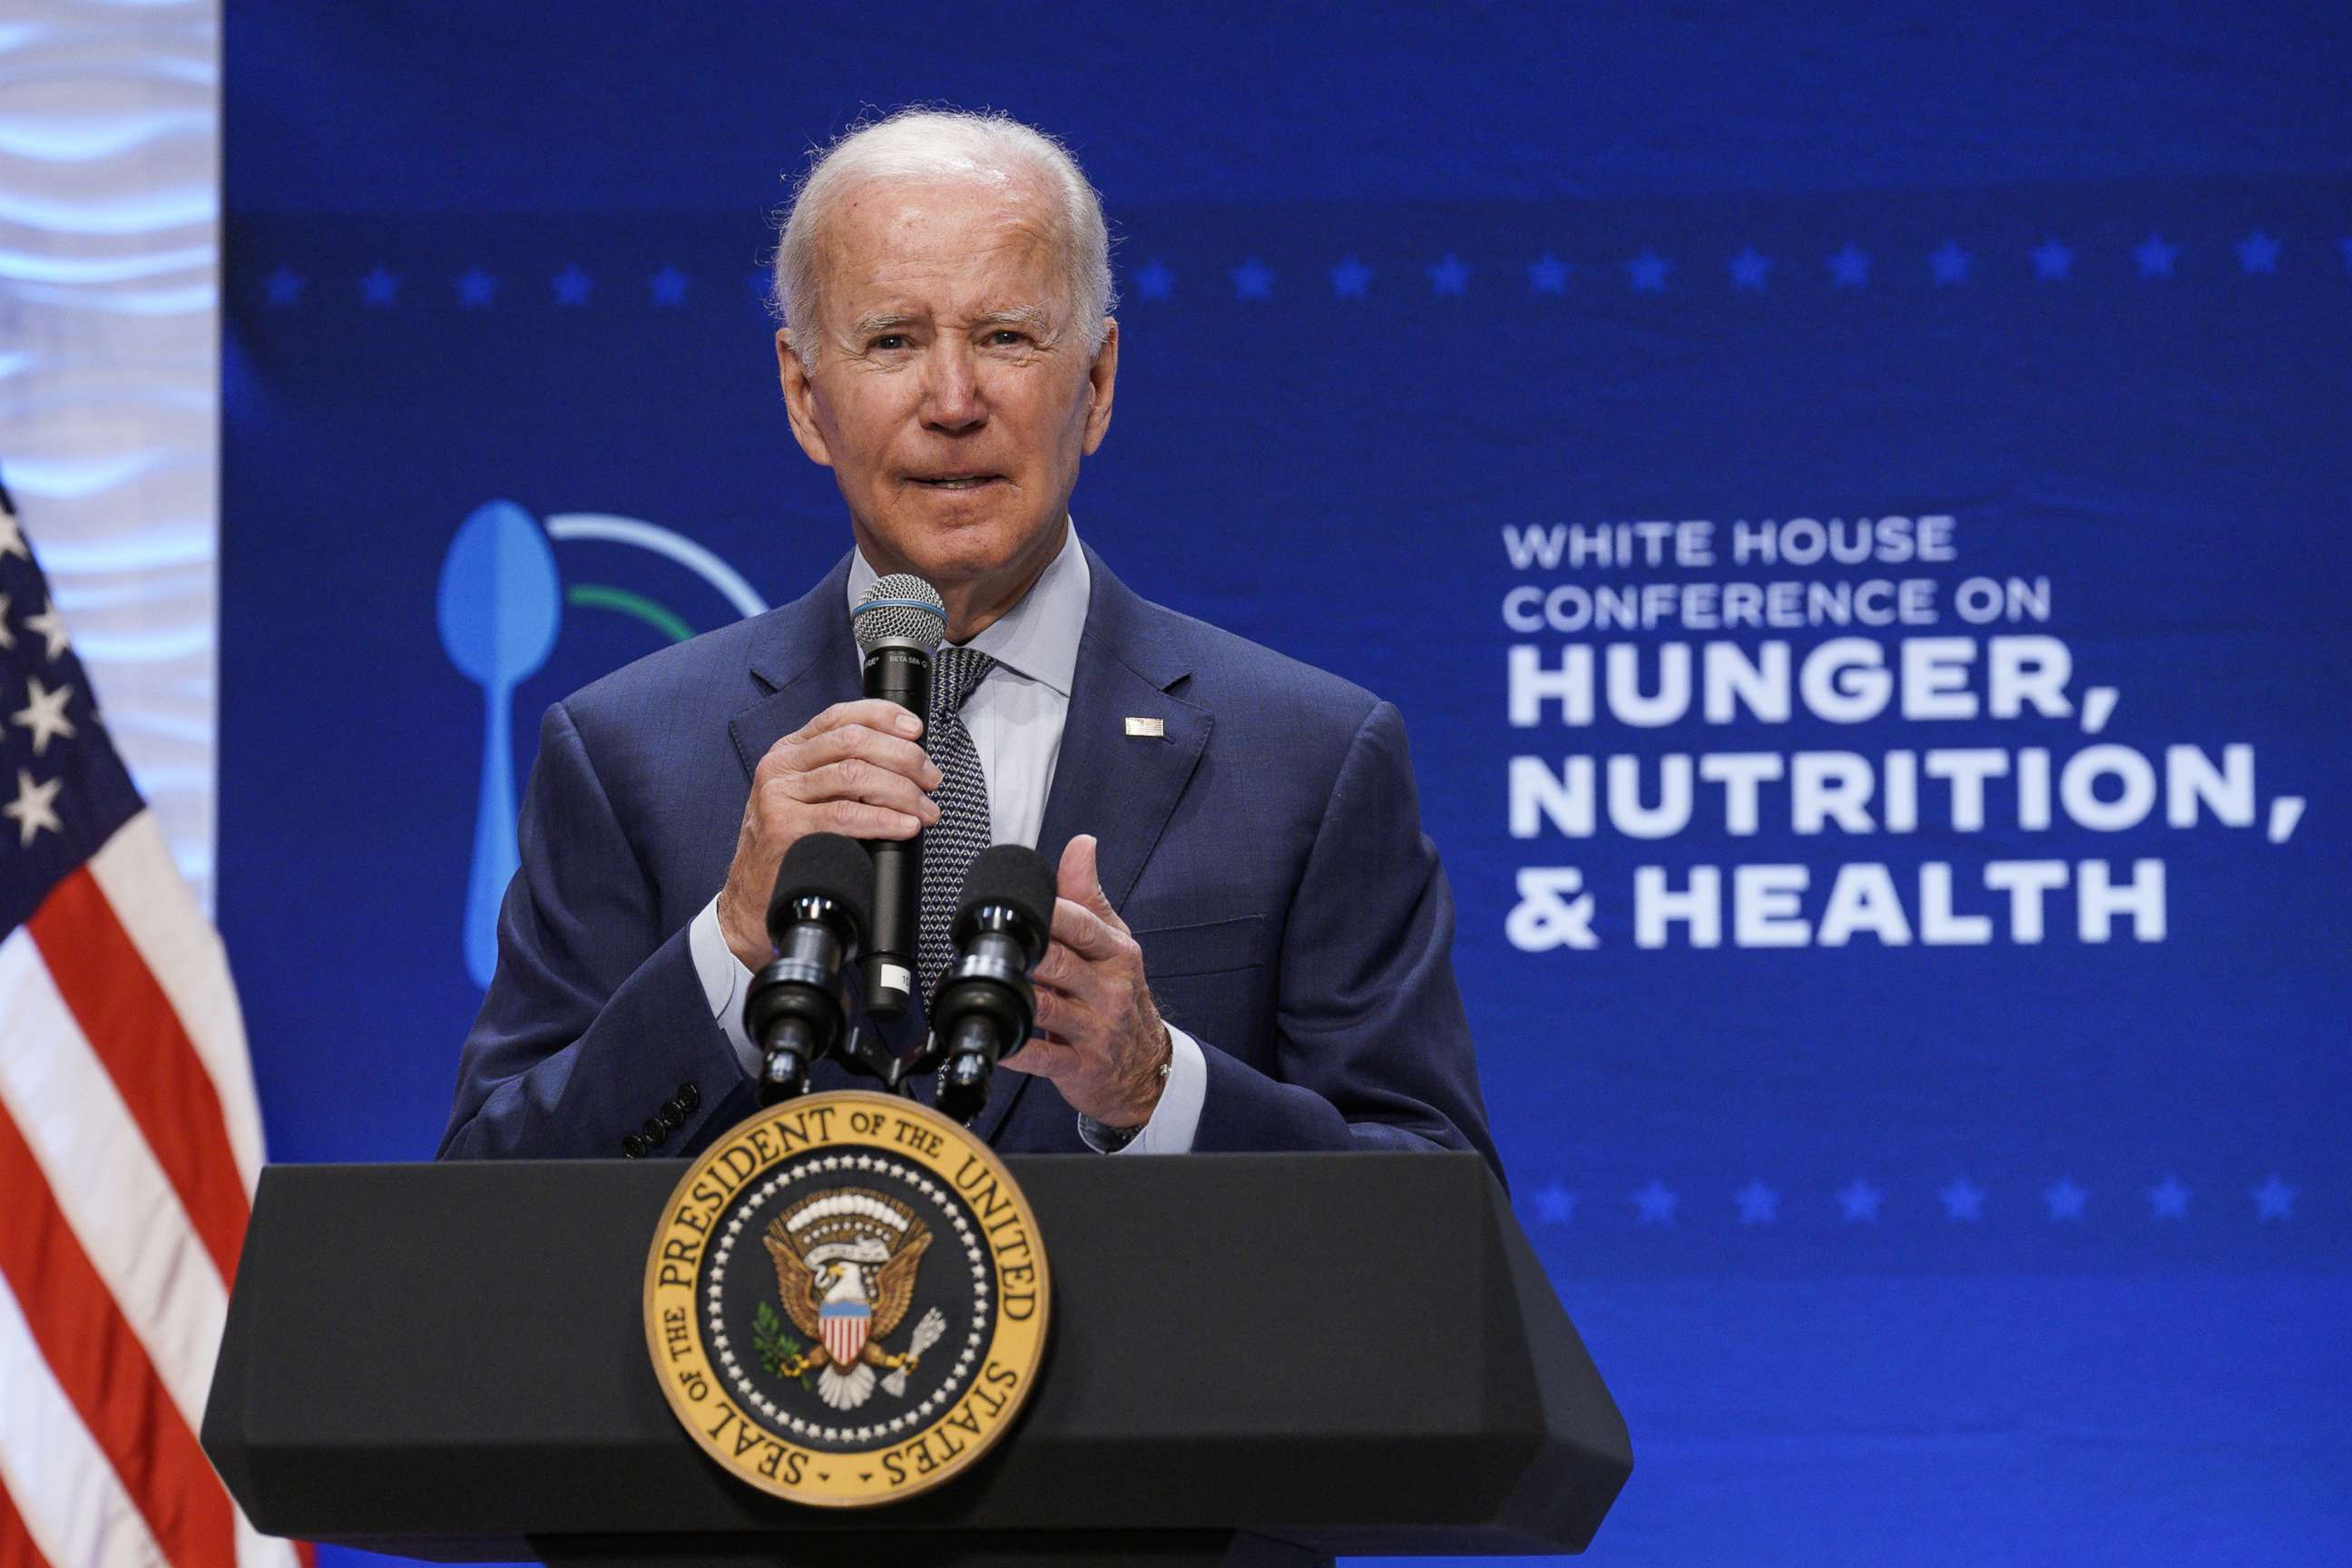 PHOTO: President Joe Biden speaks at the White House Conference On Hunger, Nutrition And Health in Washington, D.C., on Sept. 28, 2022.